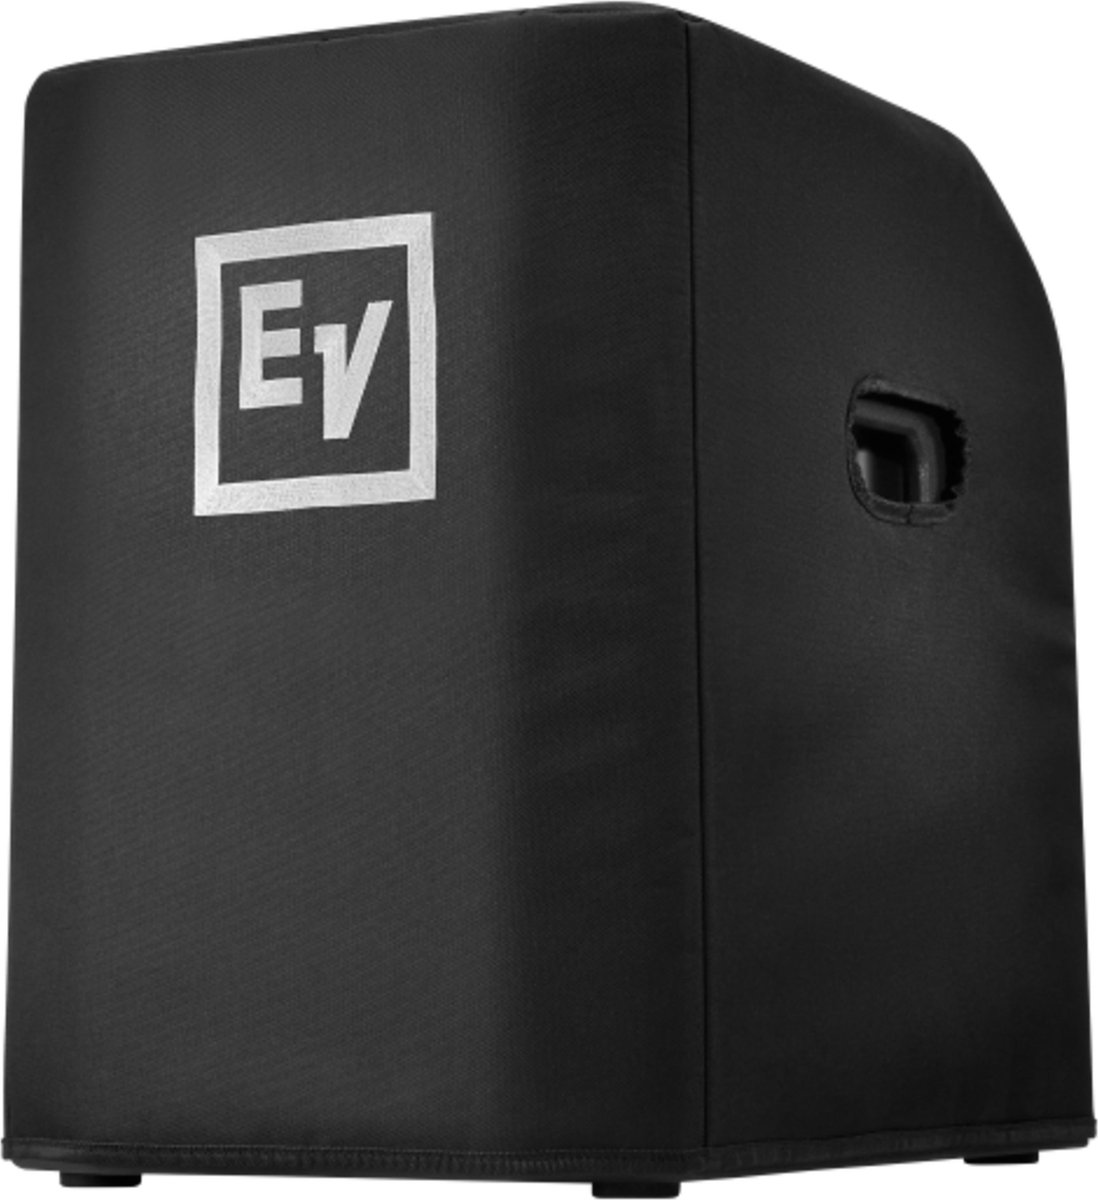 Electro Voice EVOLVE 50 SUBCVR Subwoofer Cover - Luidspreker cover